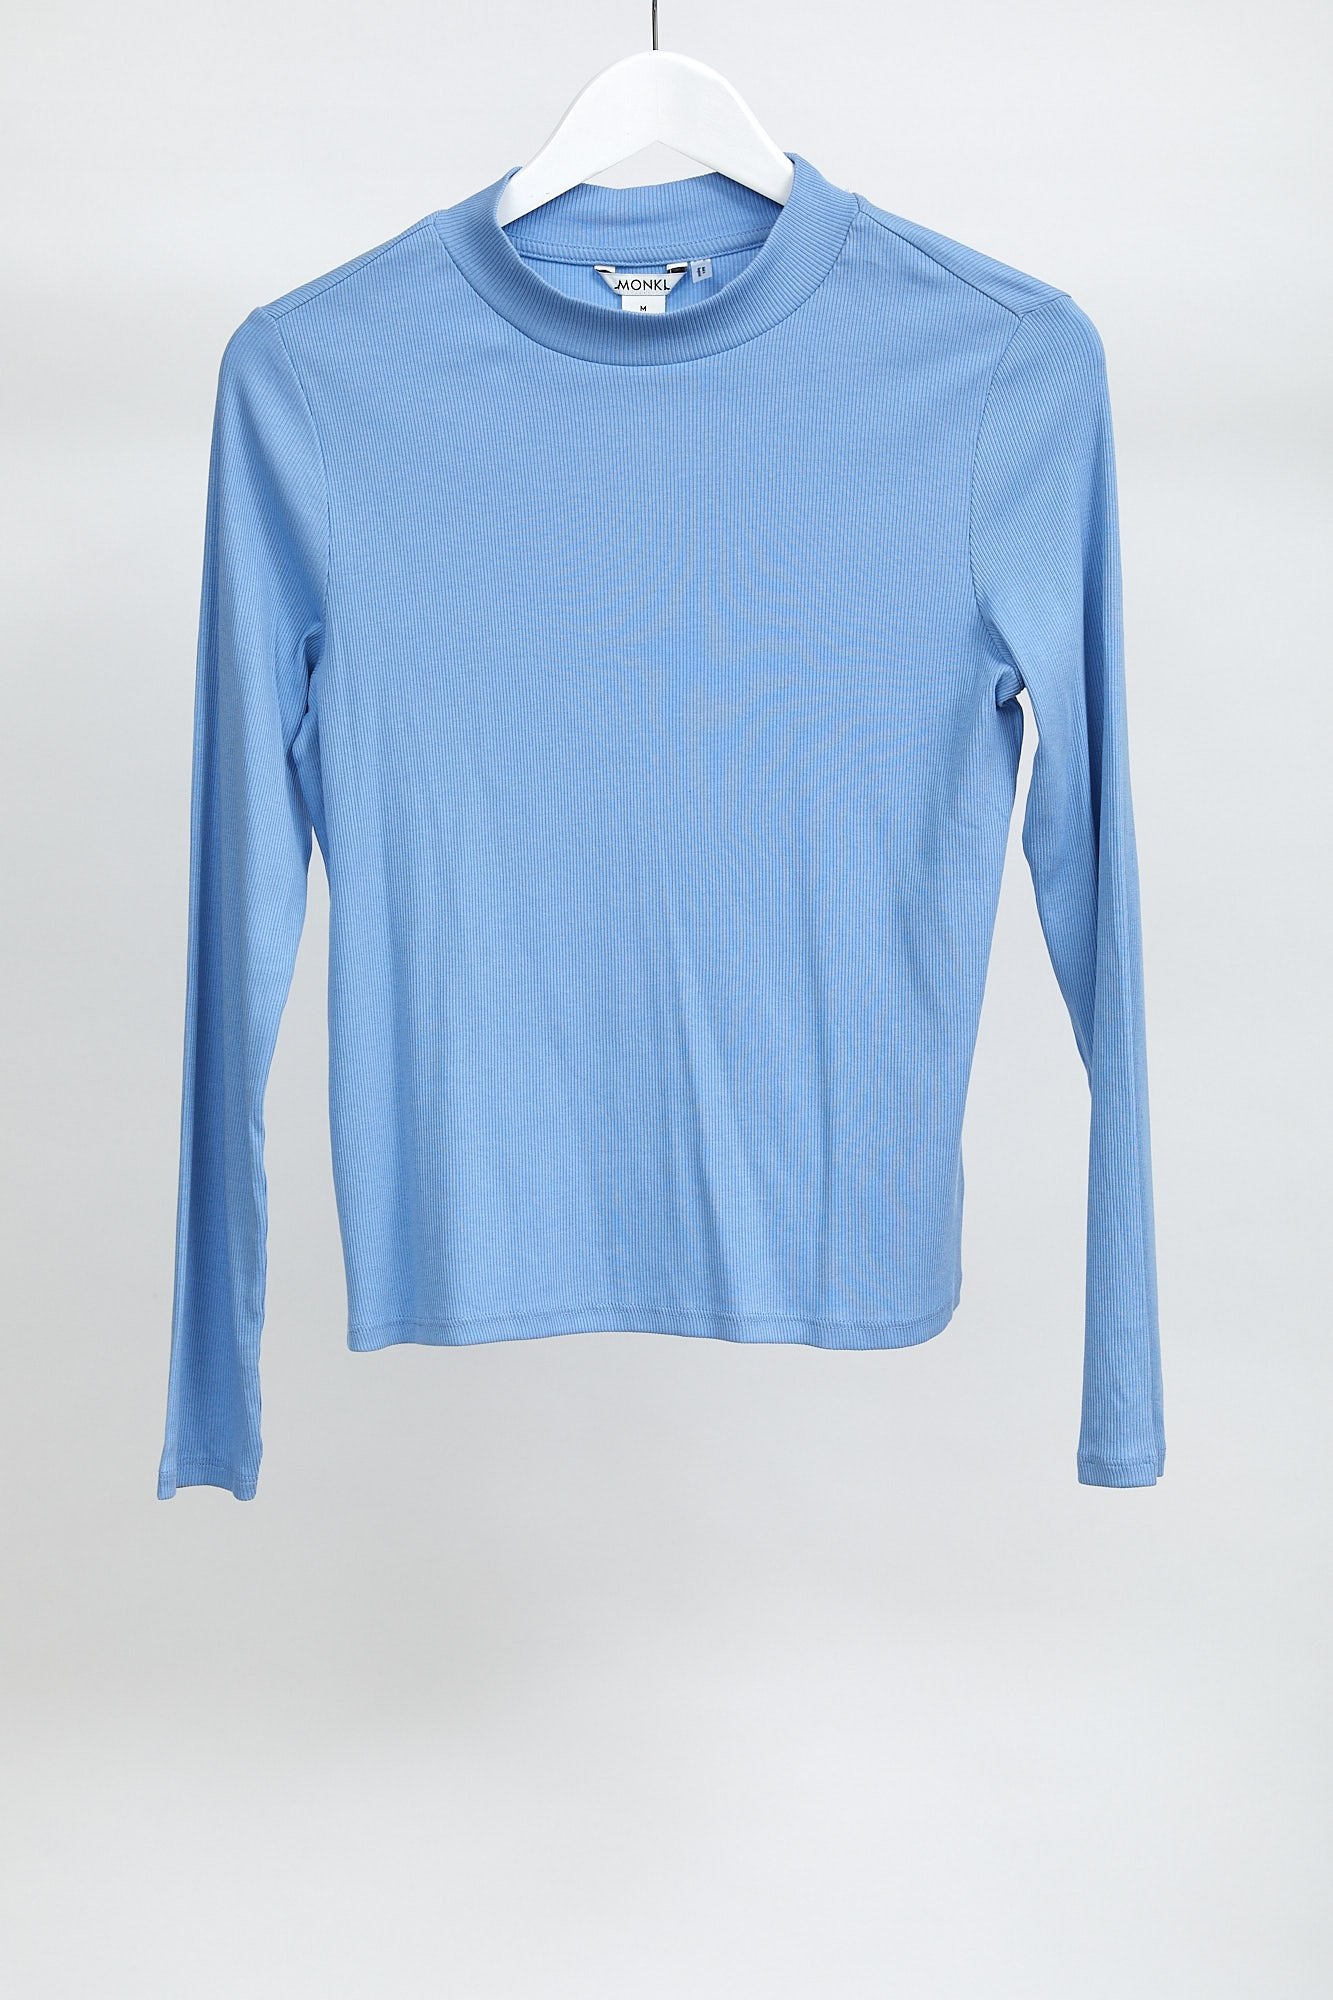 Womens Monki blue top: Size small